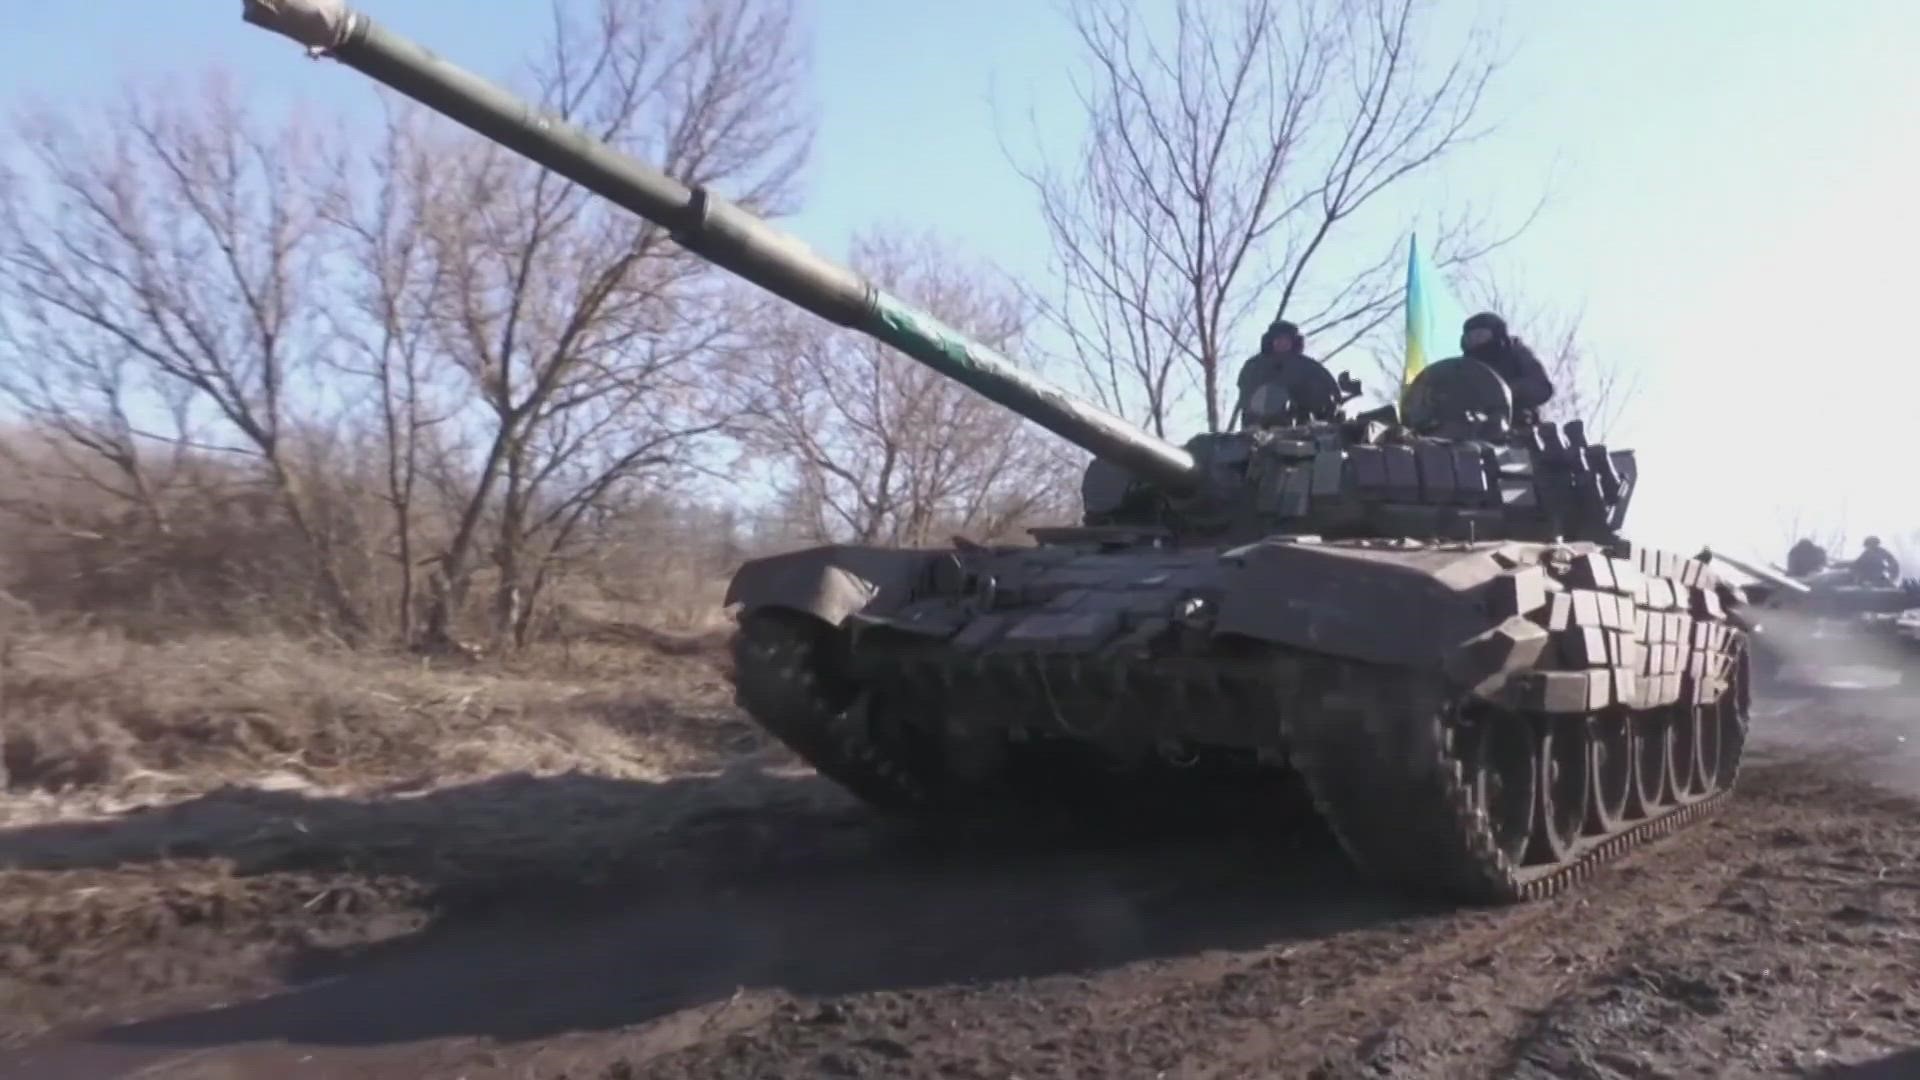 WFAA's Megan Mitchell breaks down where things stand one year into the Russia invasion of Ukraine.